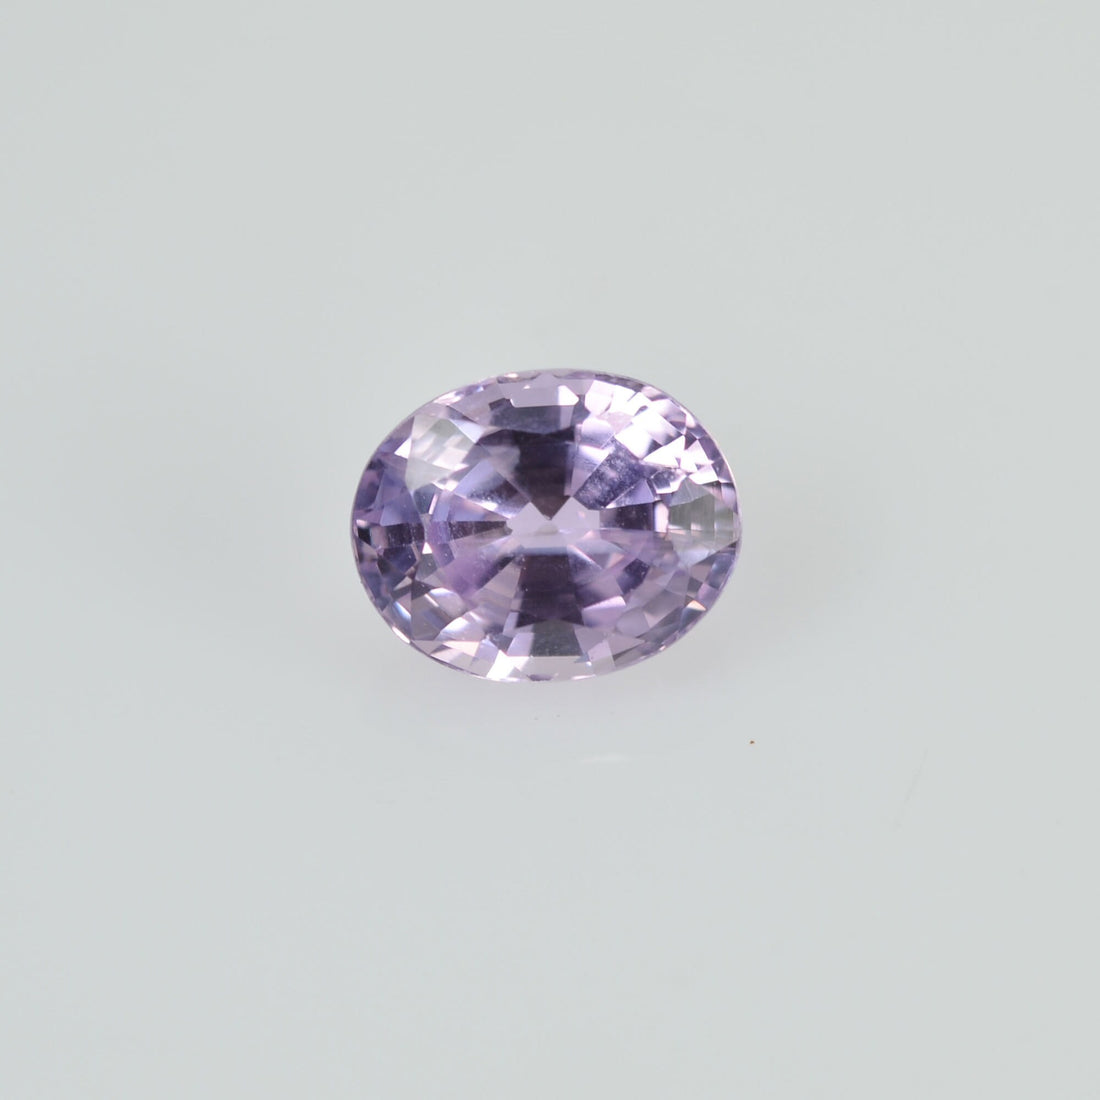 0.46 cts Natural Pink Sapphire Loose Gemstone oval Cut